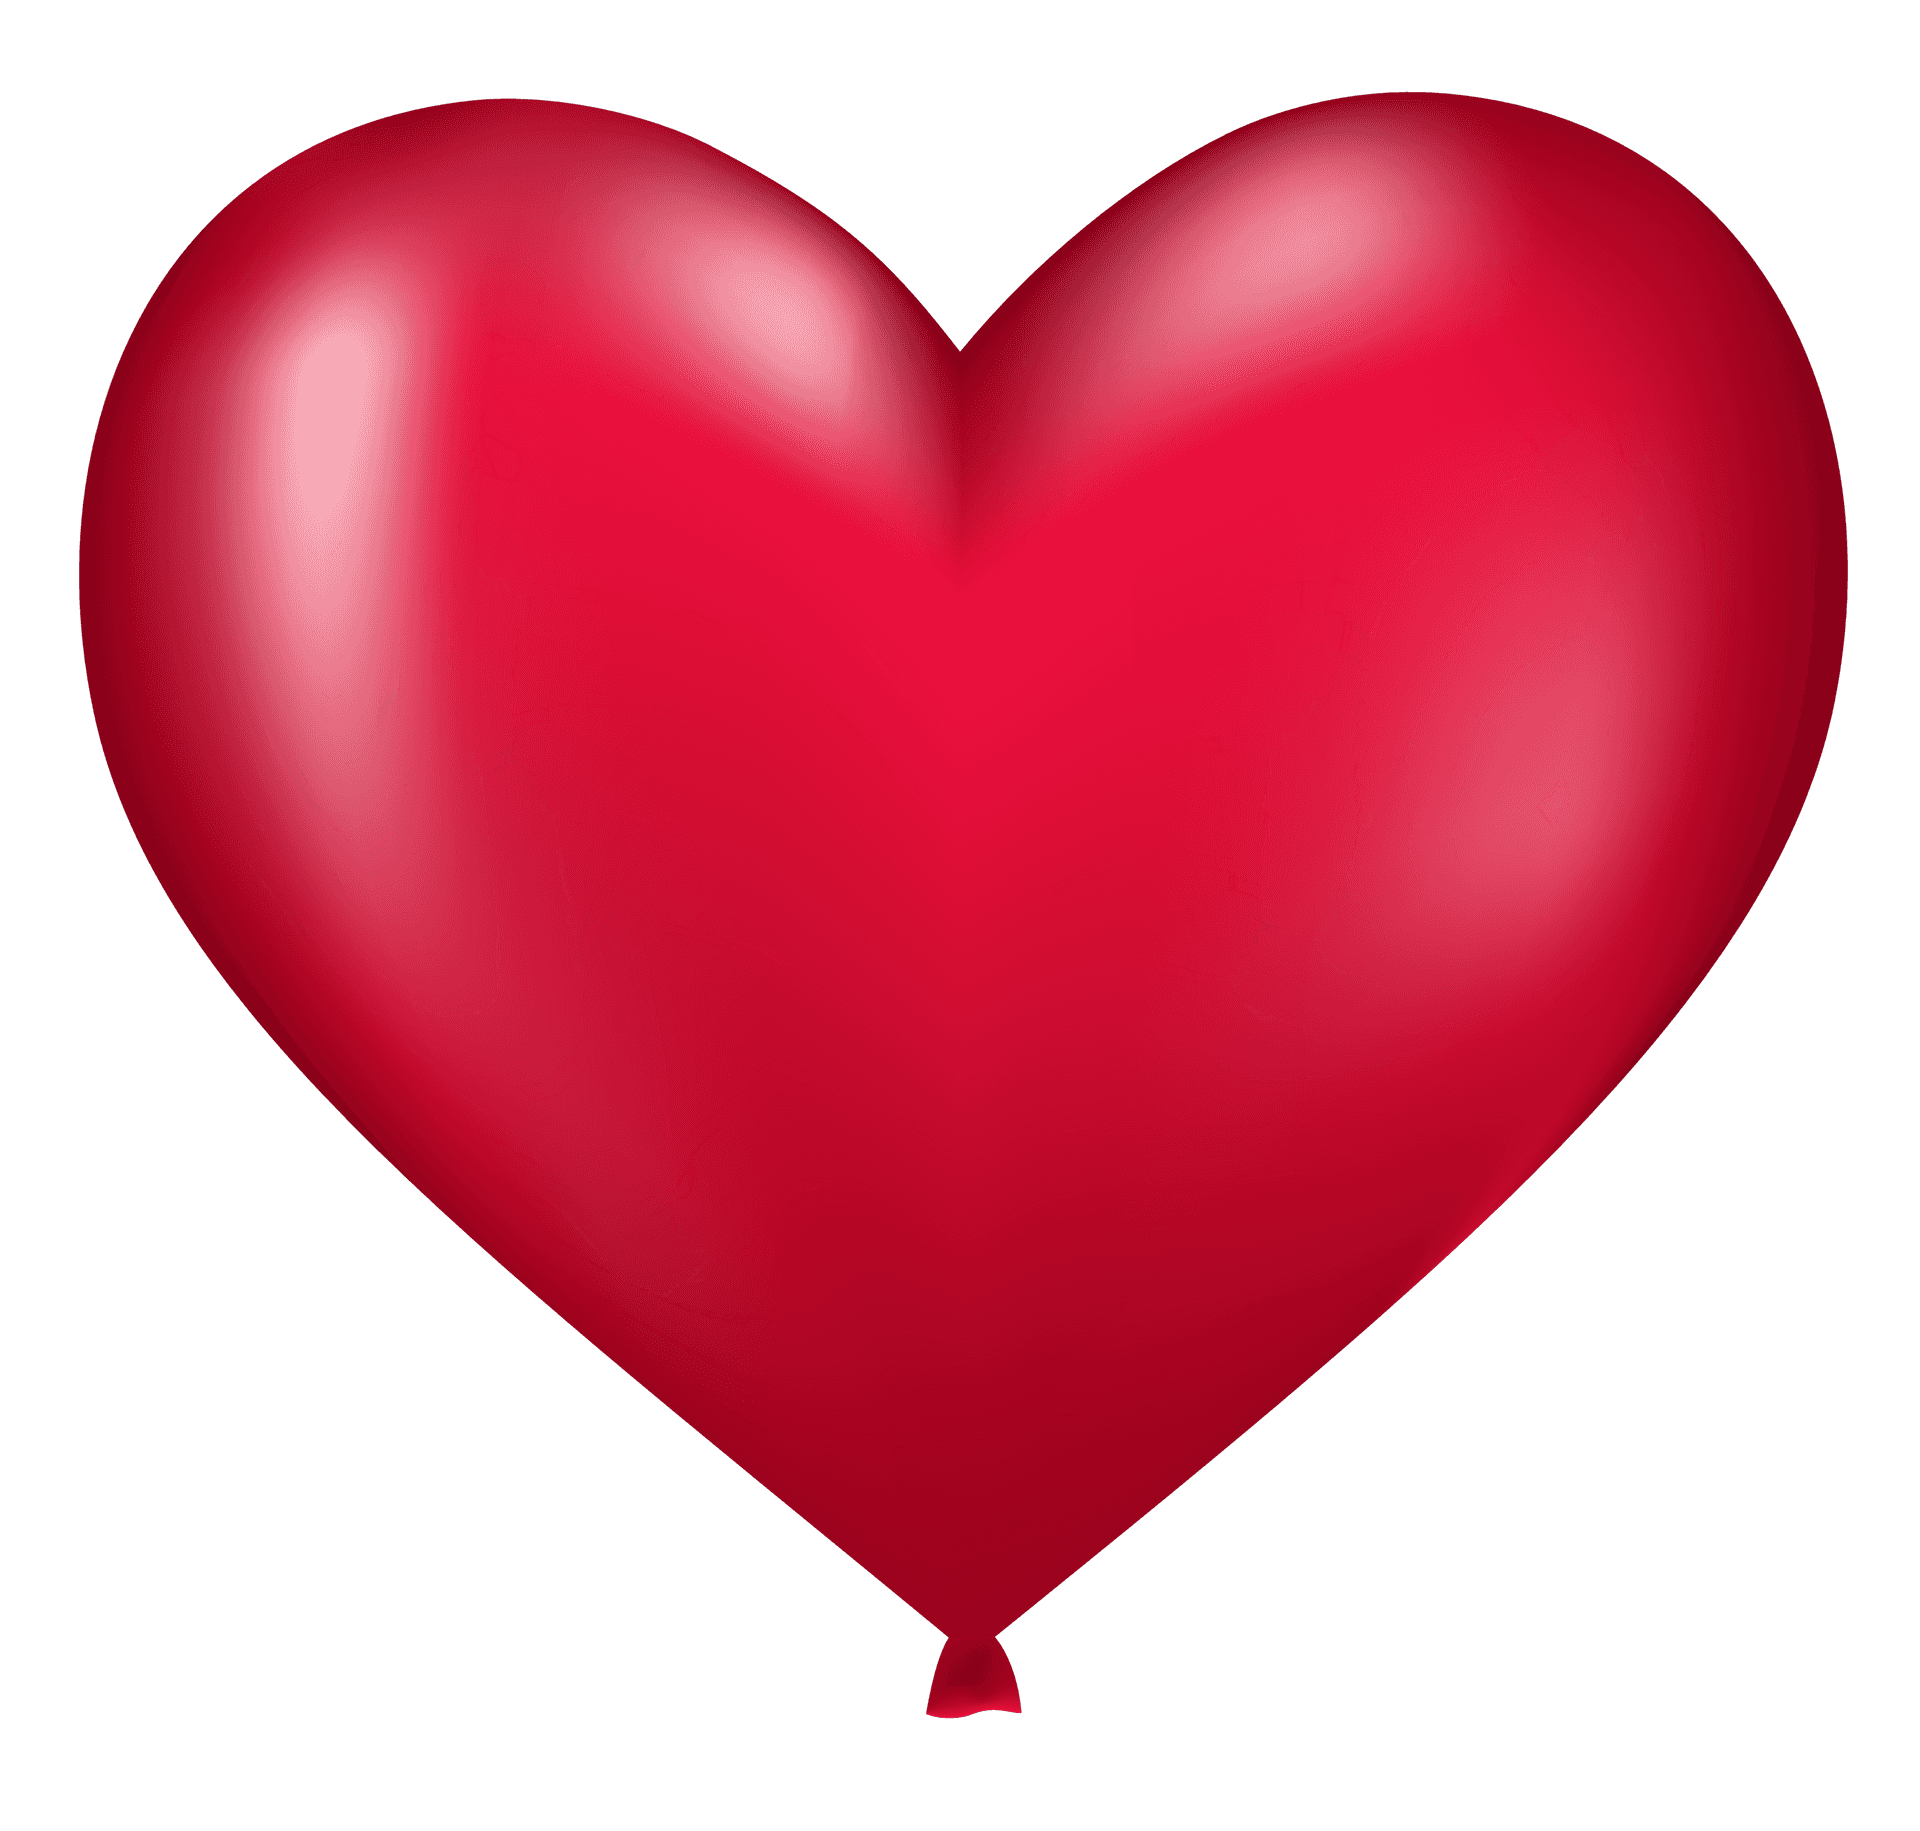 Red Heart Balloon Illustration PNG image